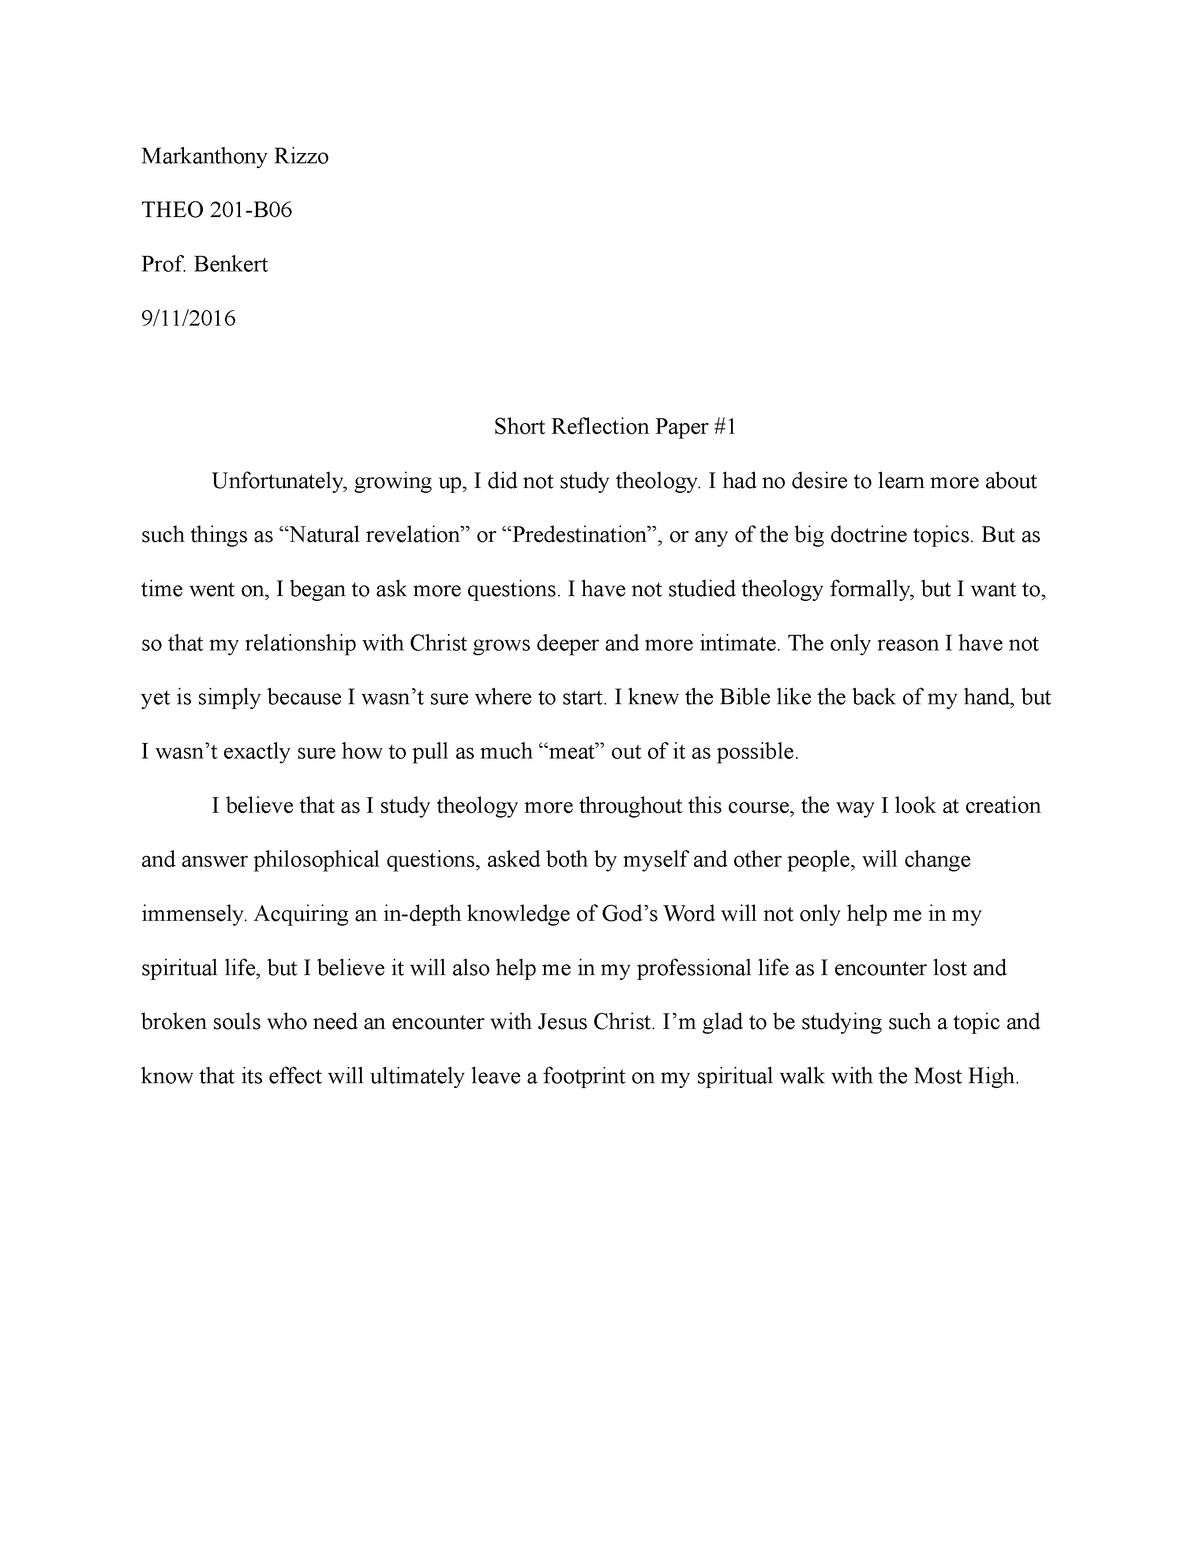 Personal Theology Reflection Paper